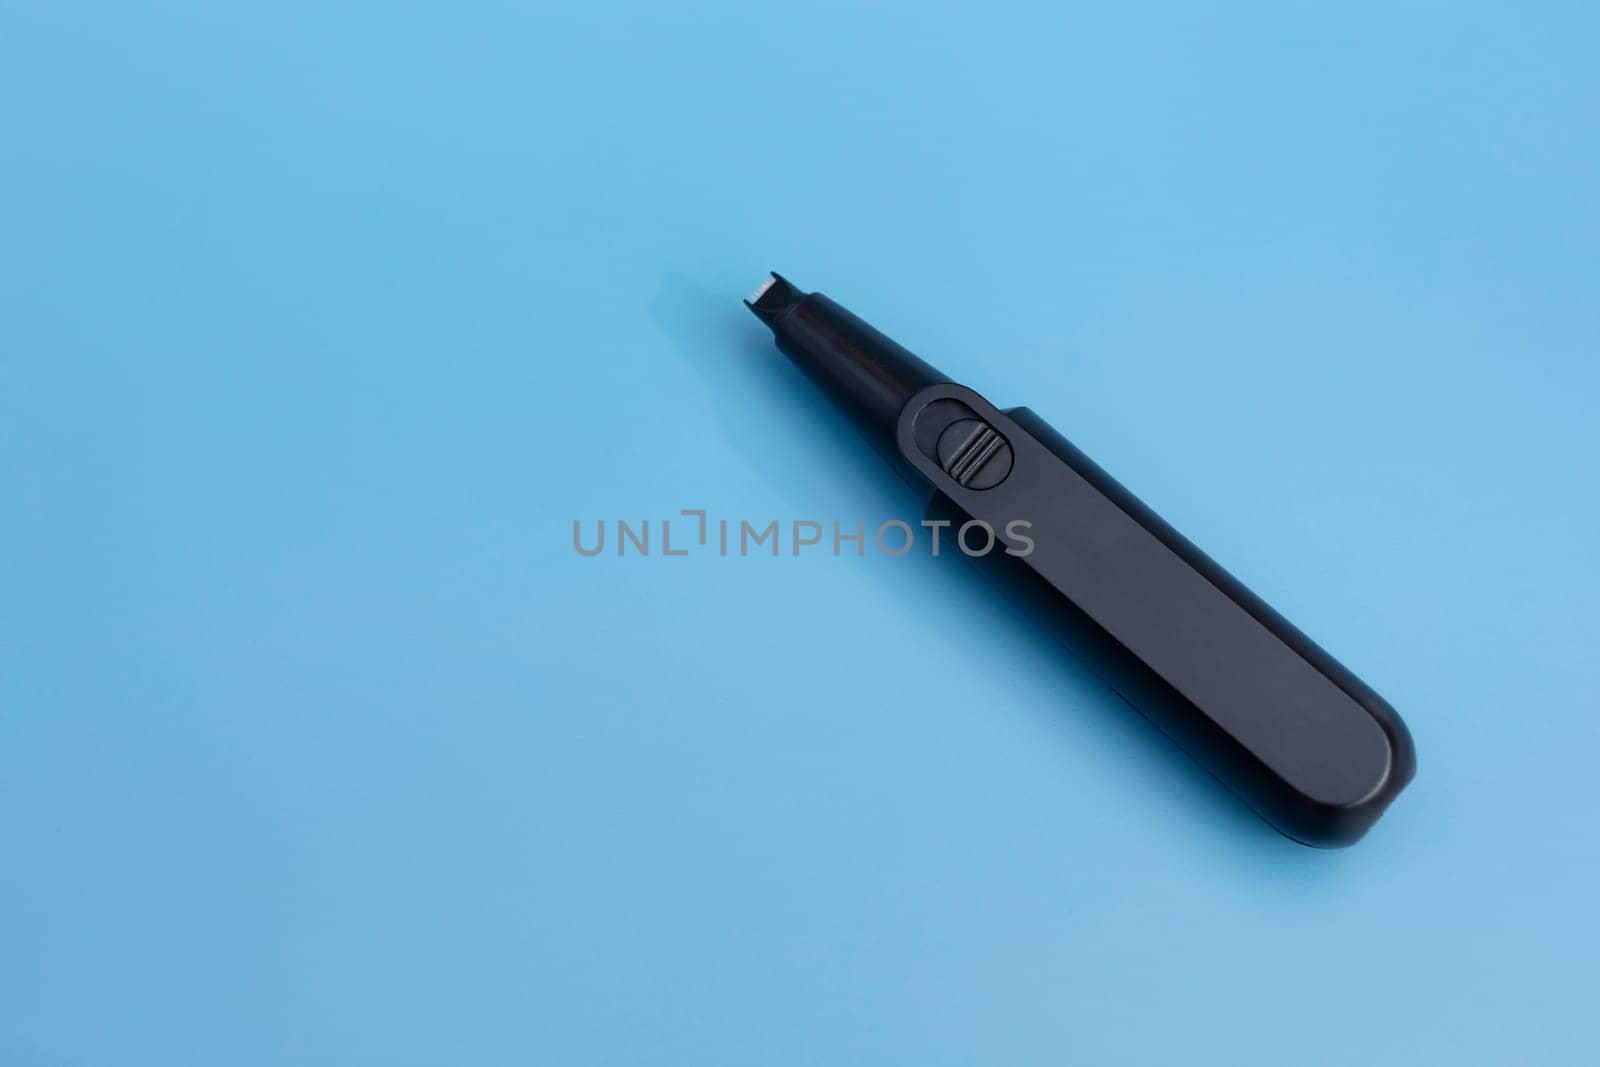 Mockup Nose Razor On Blue Background, Flatly. Compact Electric Nose And Ear Hair Trimmer, Facial Shaver. Nose And Ear Hair Removal Tool, Space For Text. Horizontal Plane. High quality photo